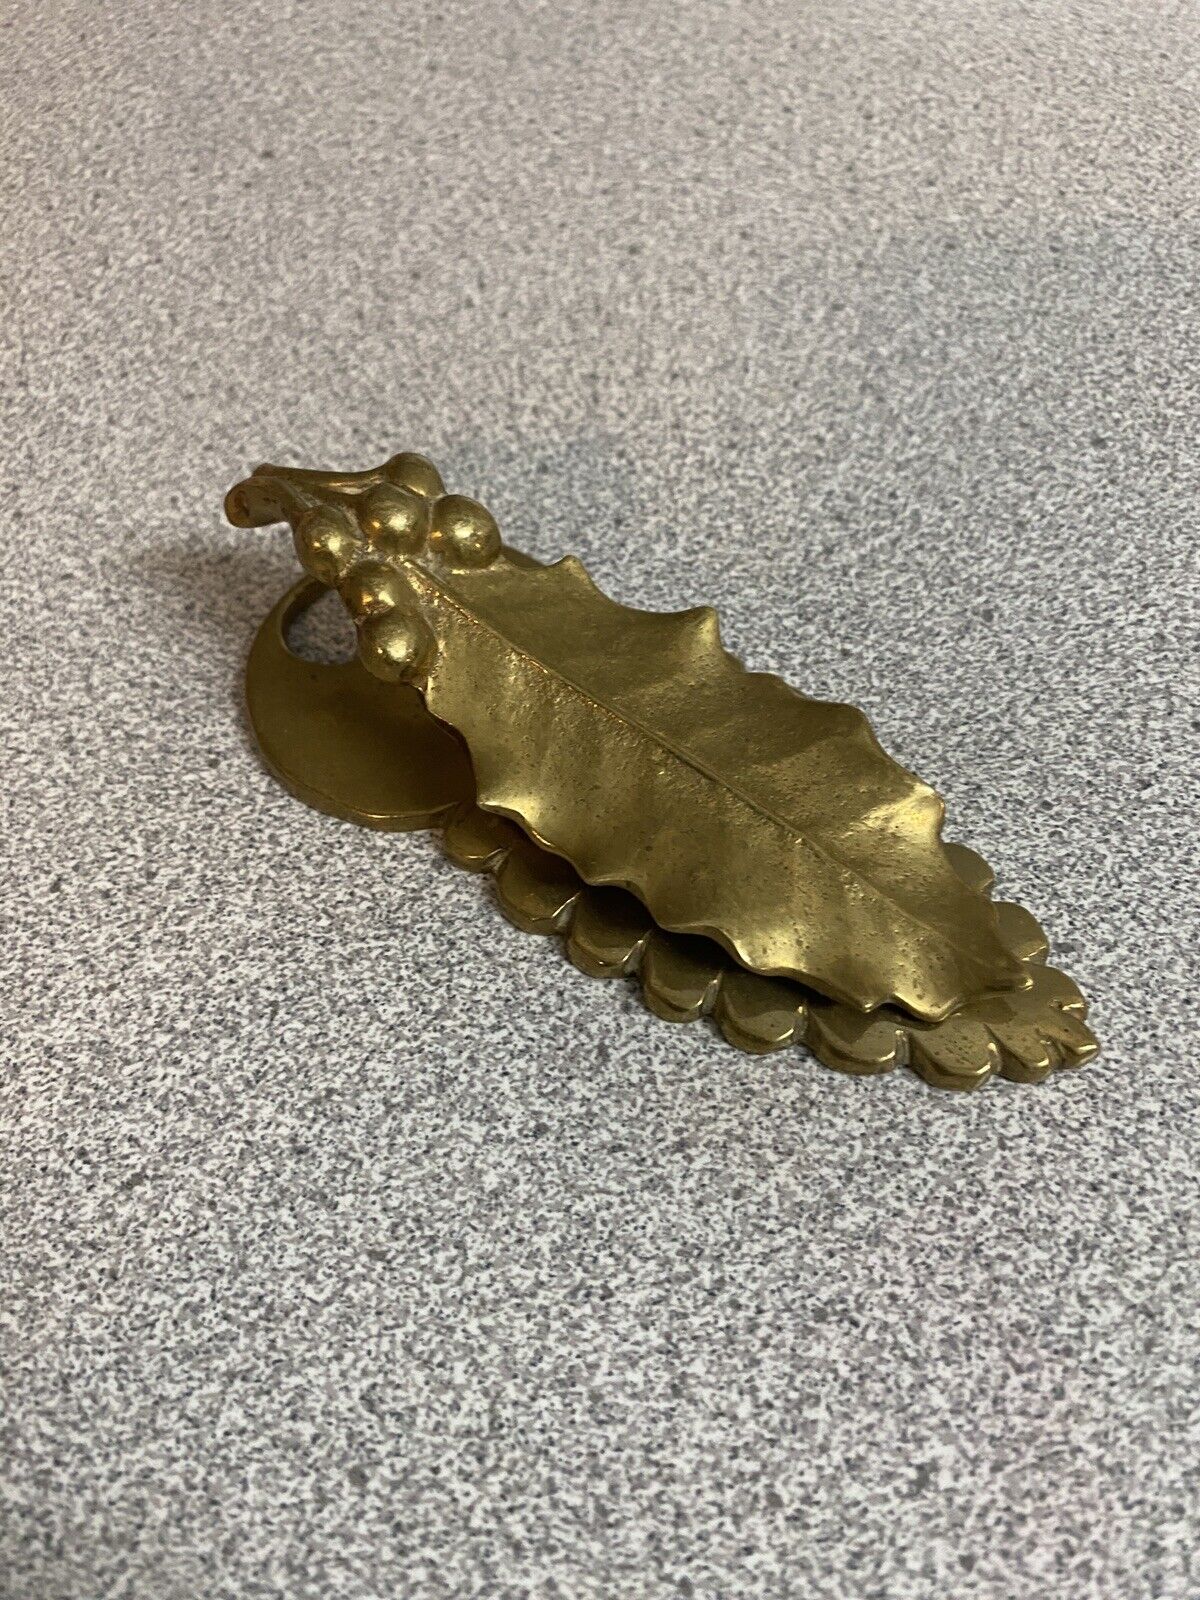 1950s Vintage Virginia Metalcrafters 4.25” Brass Holly Leaf Desk/Wall Paper Clip